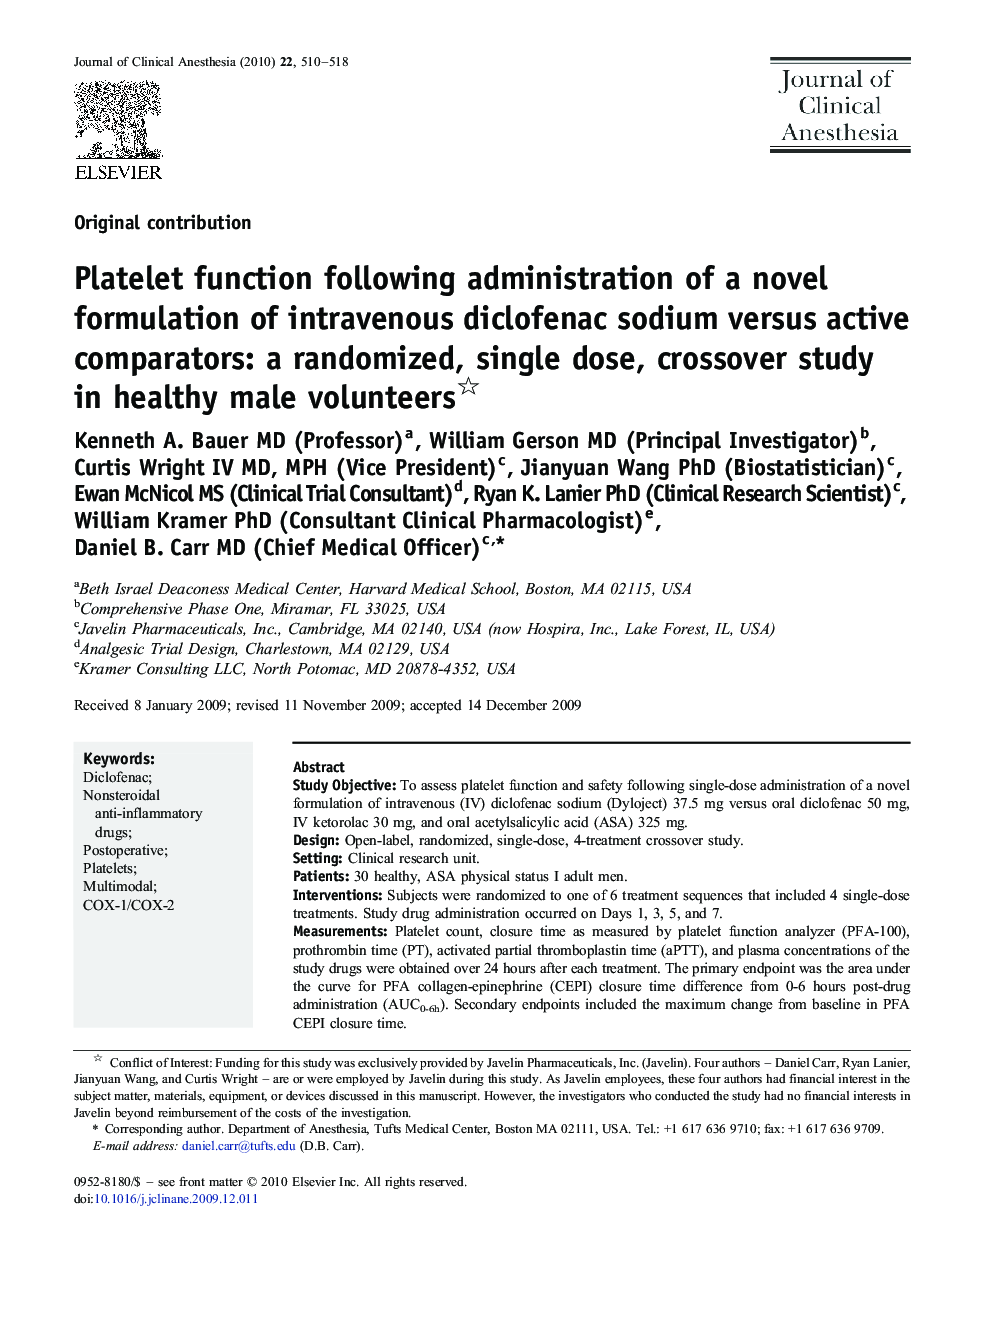 Platelet function following administration of a novel formulation of intravenous diclofenac sodium versus active comparators: a randomized, single dose, crossover study in healthy male volunteers 